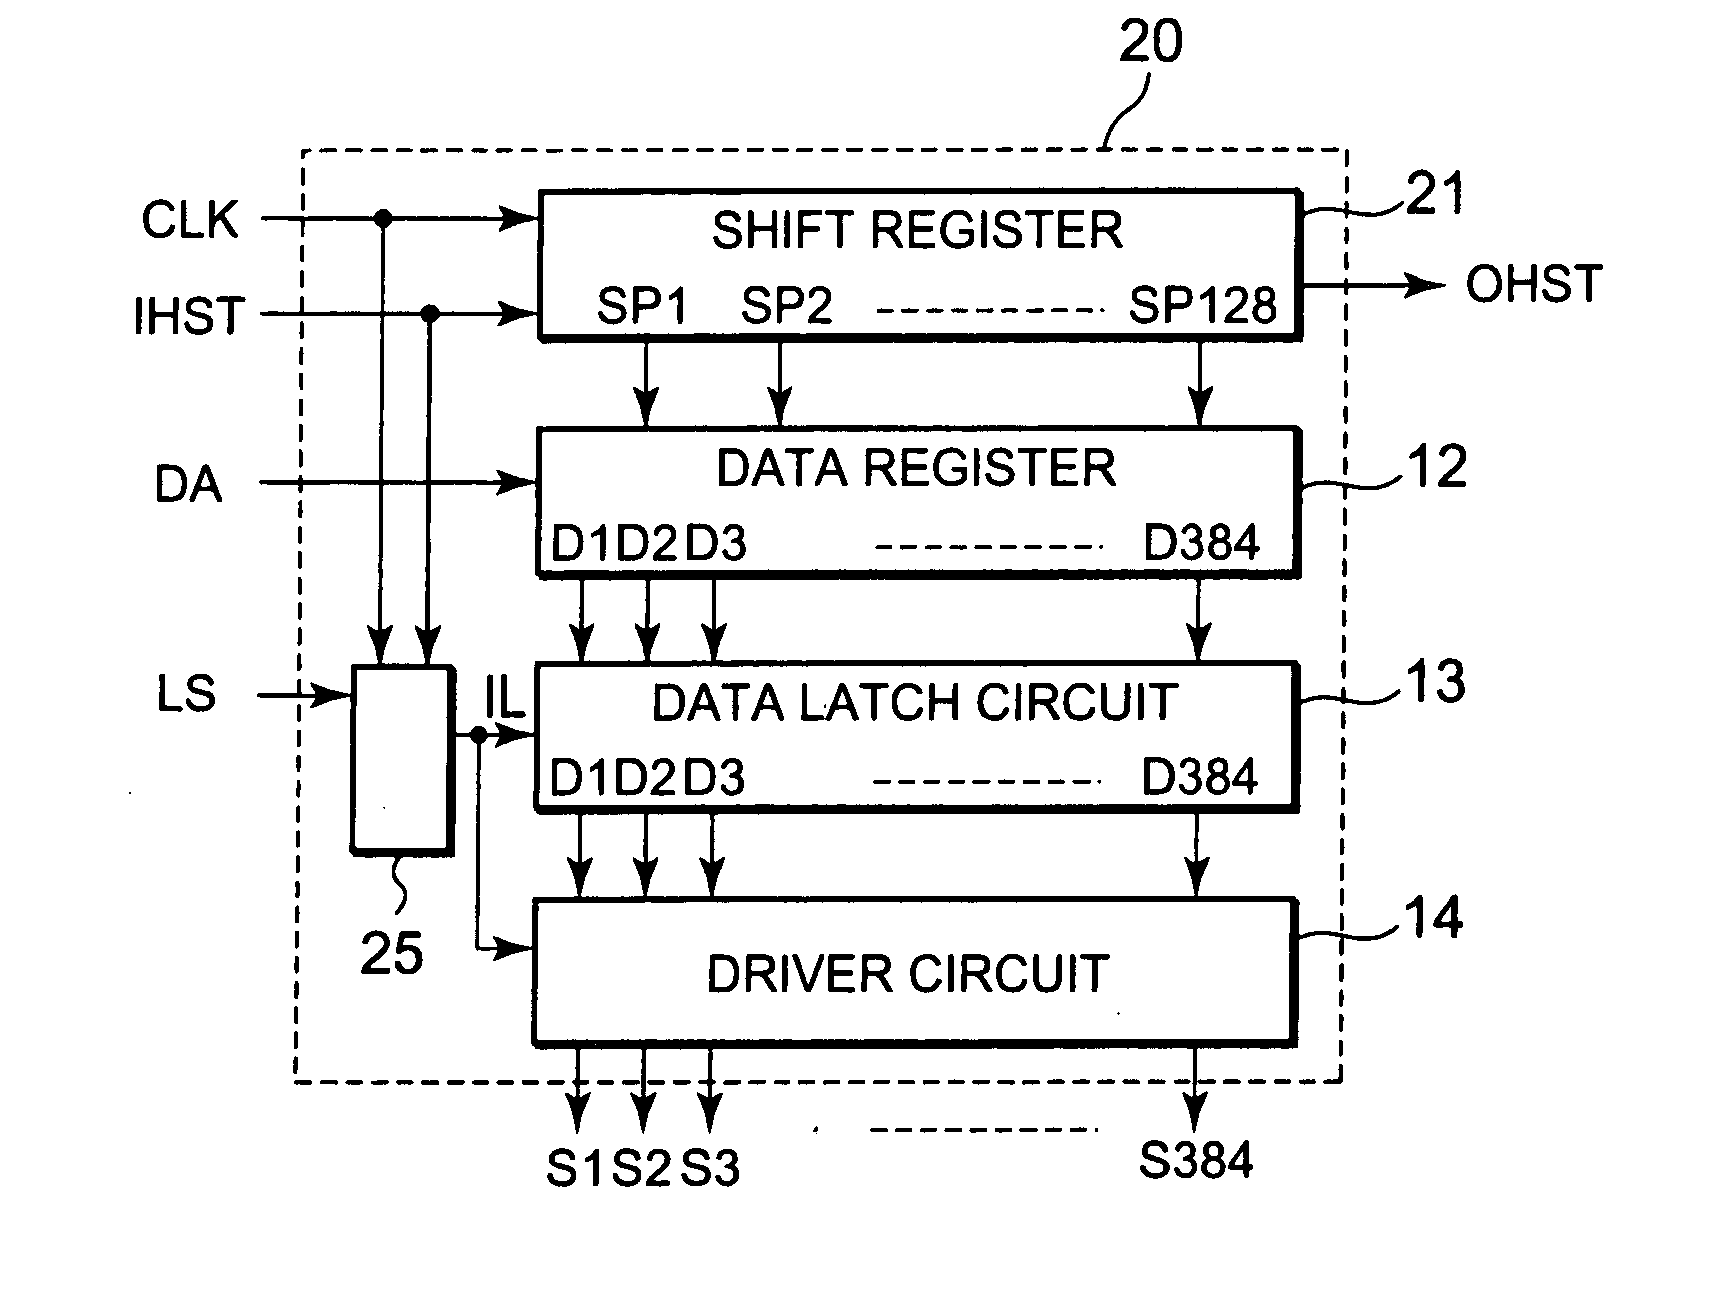 Driving circuit and data driver of planar display device